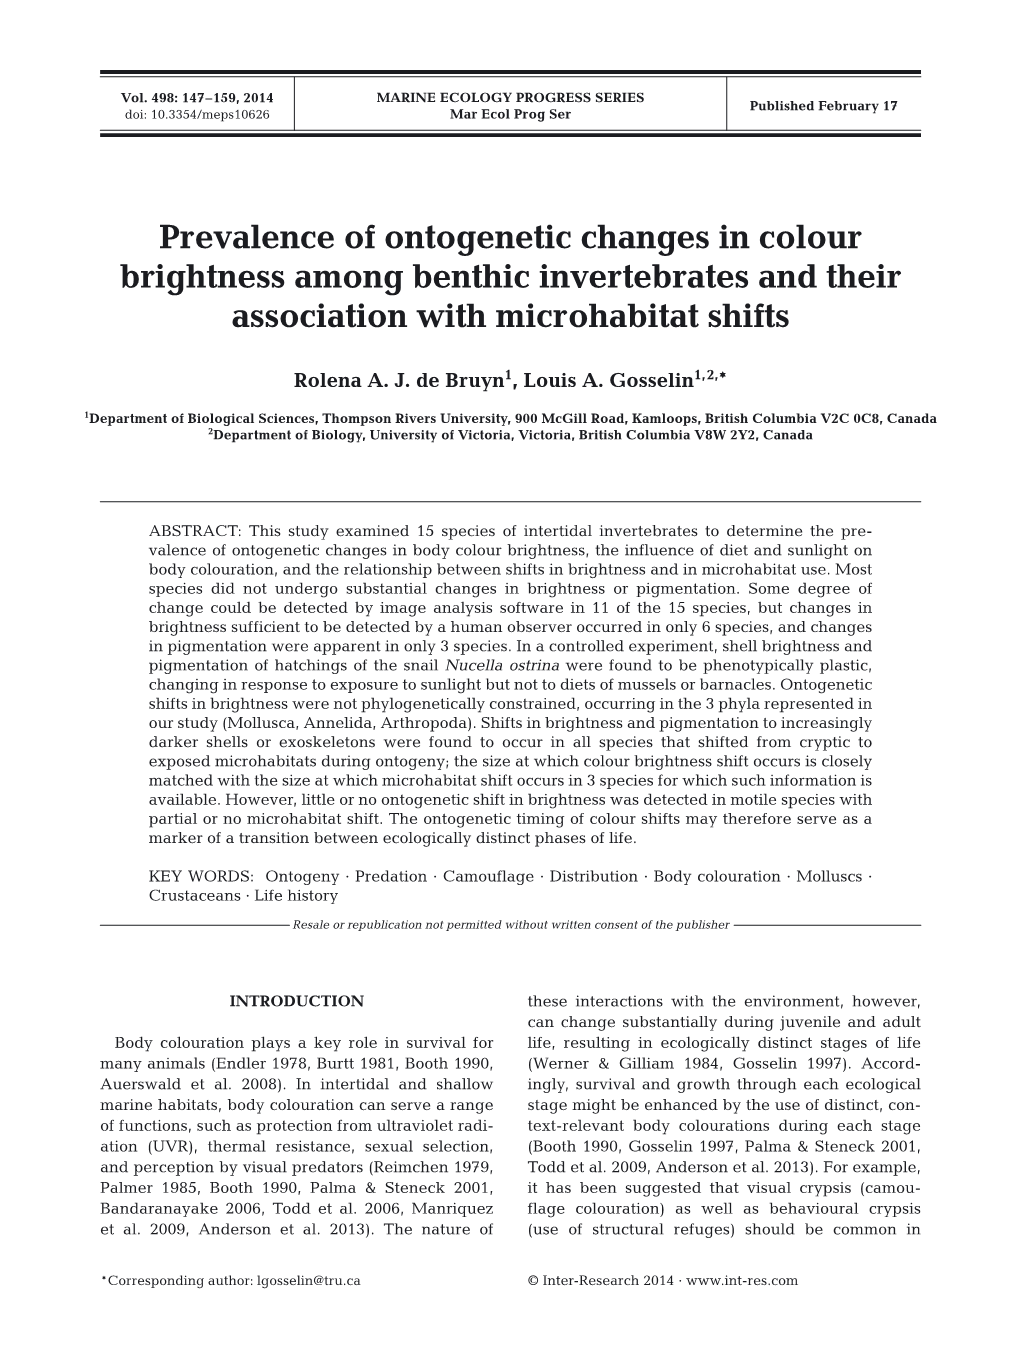 Prevalence of Ontogenetic Changes in Colour Brightness Among Benthic Invertebrates and Their Association with Microhabitat Shifts